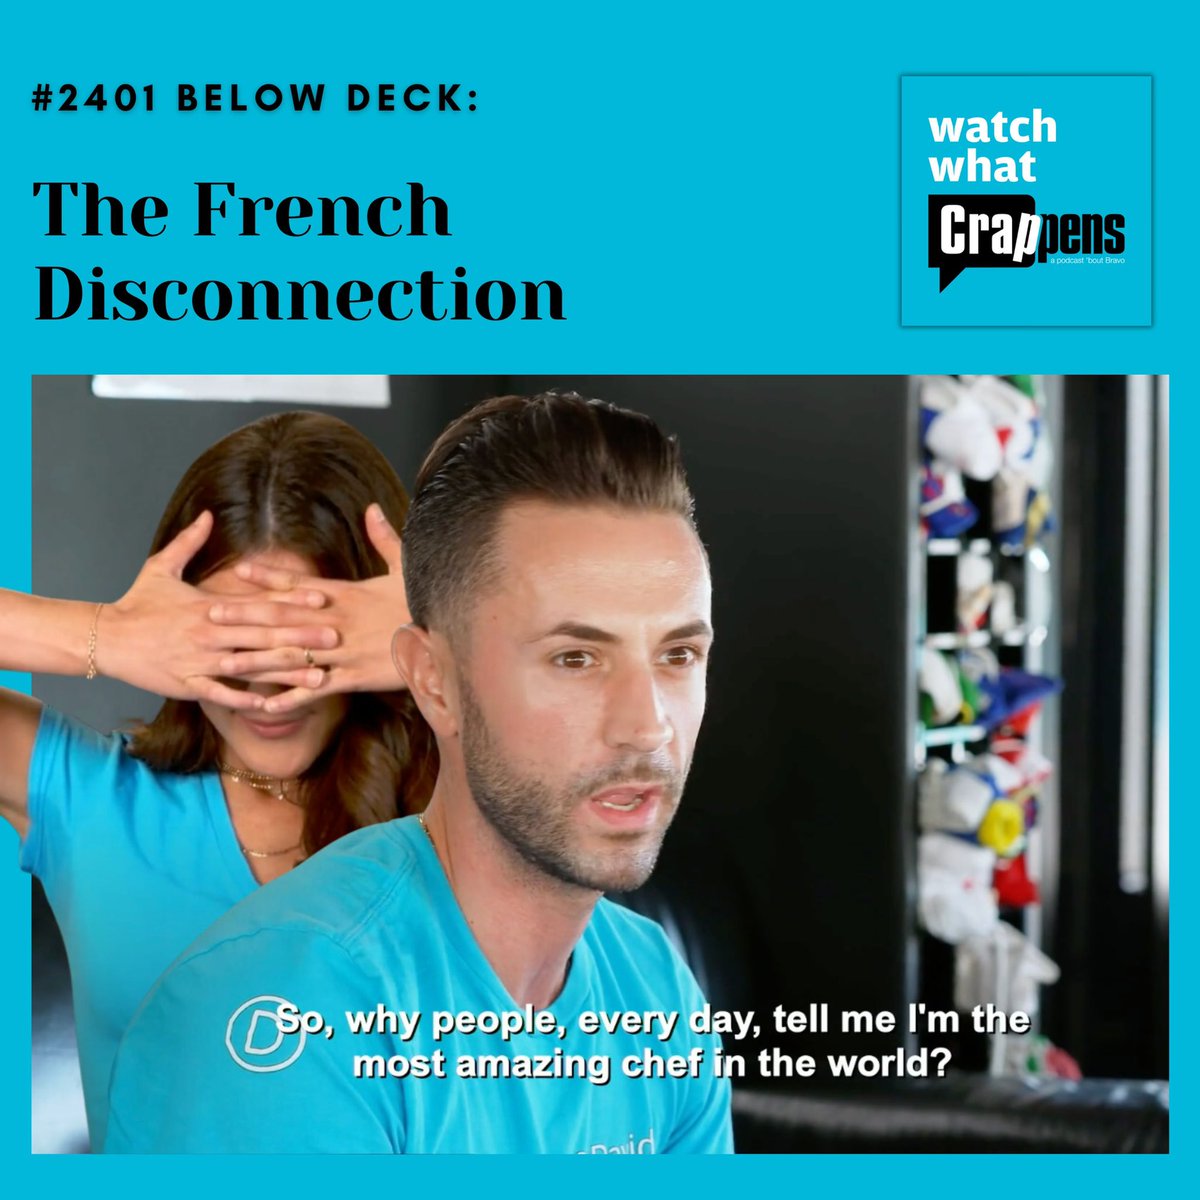 New epi! Chef is on thin ice on #BelowDeck, but some lobster grilled cheeses could be his undoing. Plus, sexytimes on the boat for some but not others. Listen wherever you get your Podcasts or watch as a Crappens On Demand Video! #BravoTV @RonnieKaram @BenMandelker